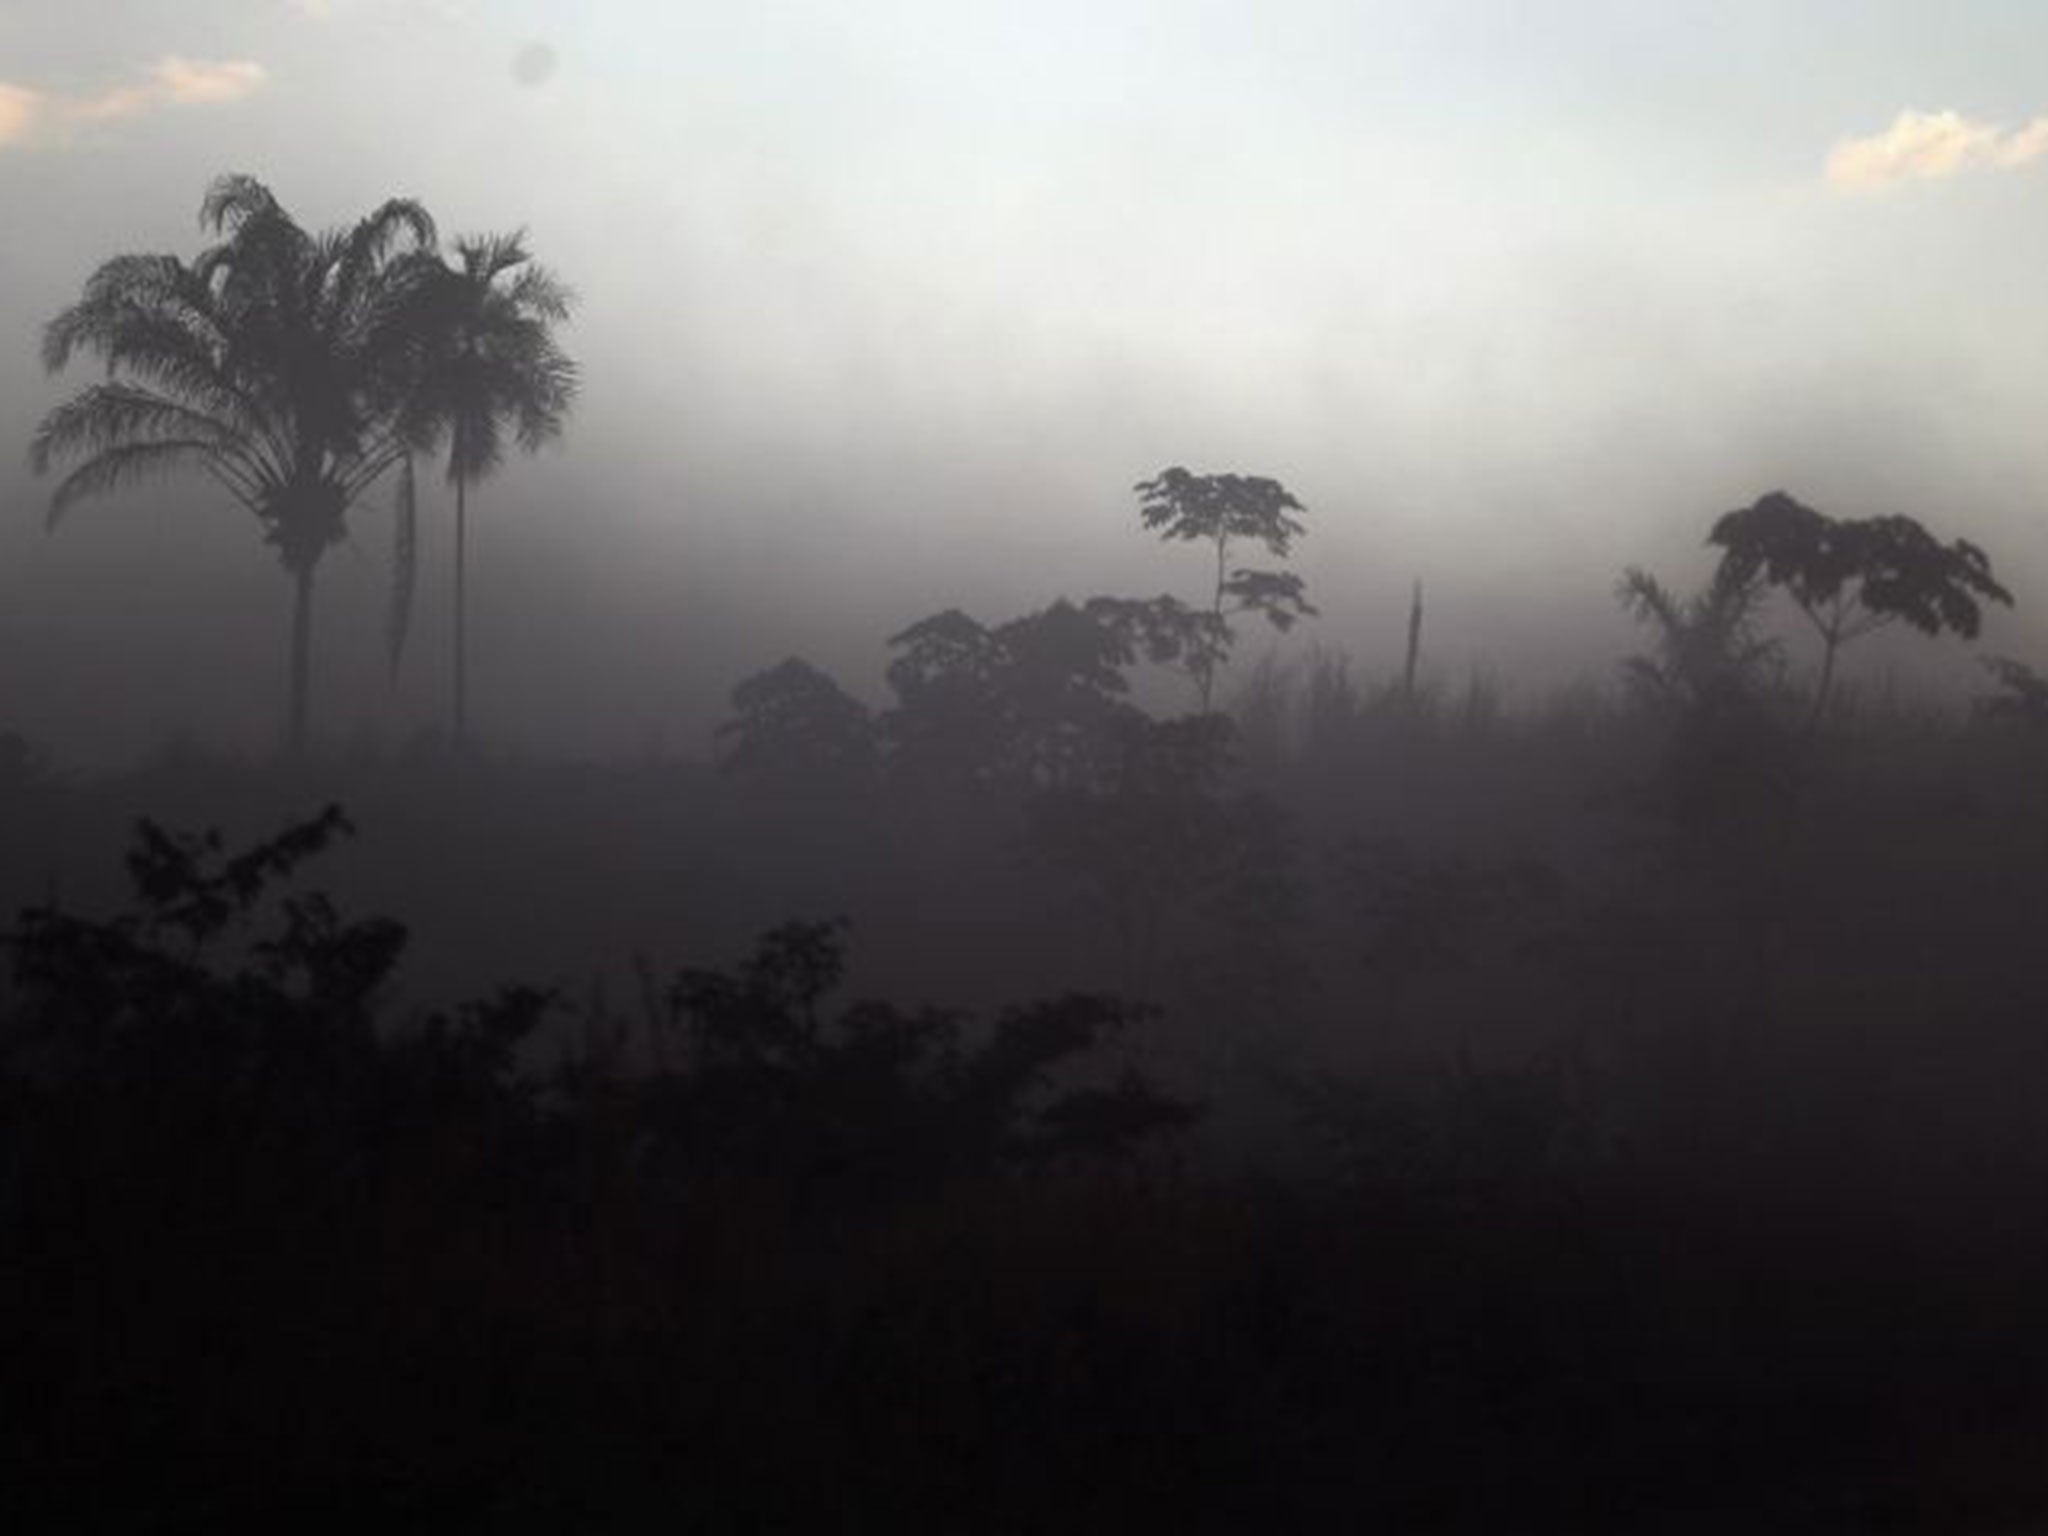 A deforested section of Amazon rainforest is seen in dust kicked up from a passing automobile (Getty)